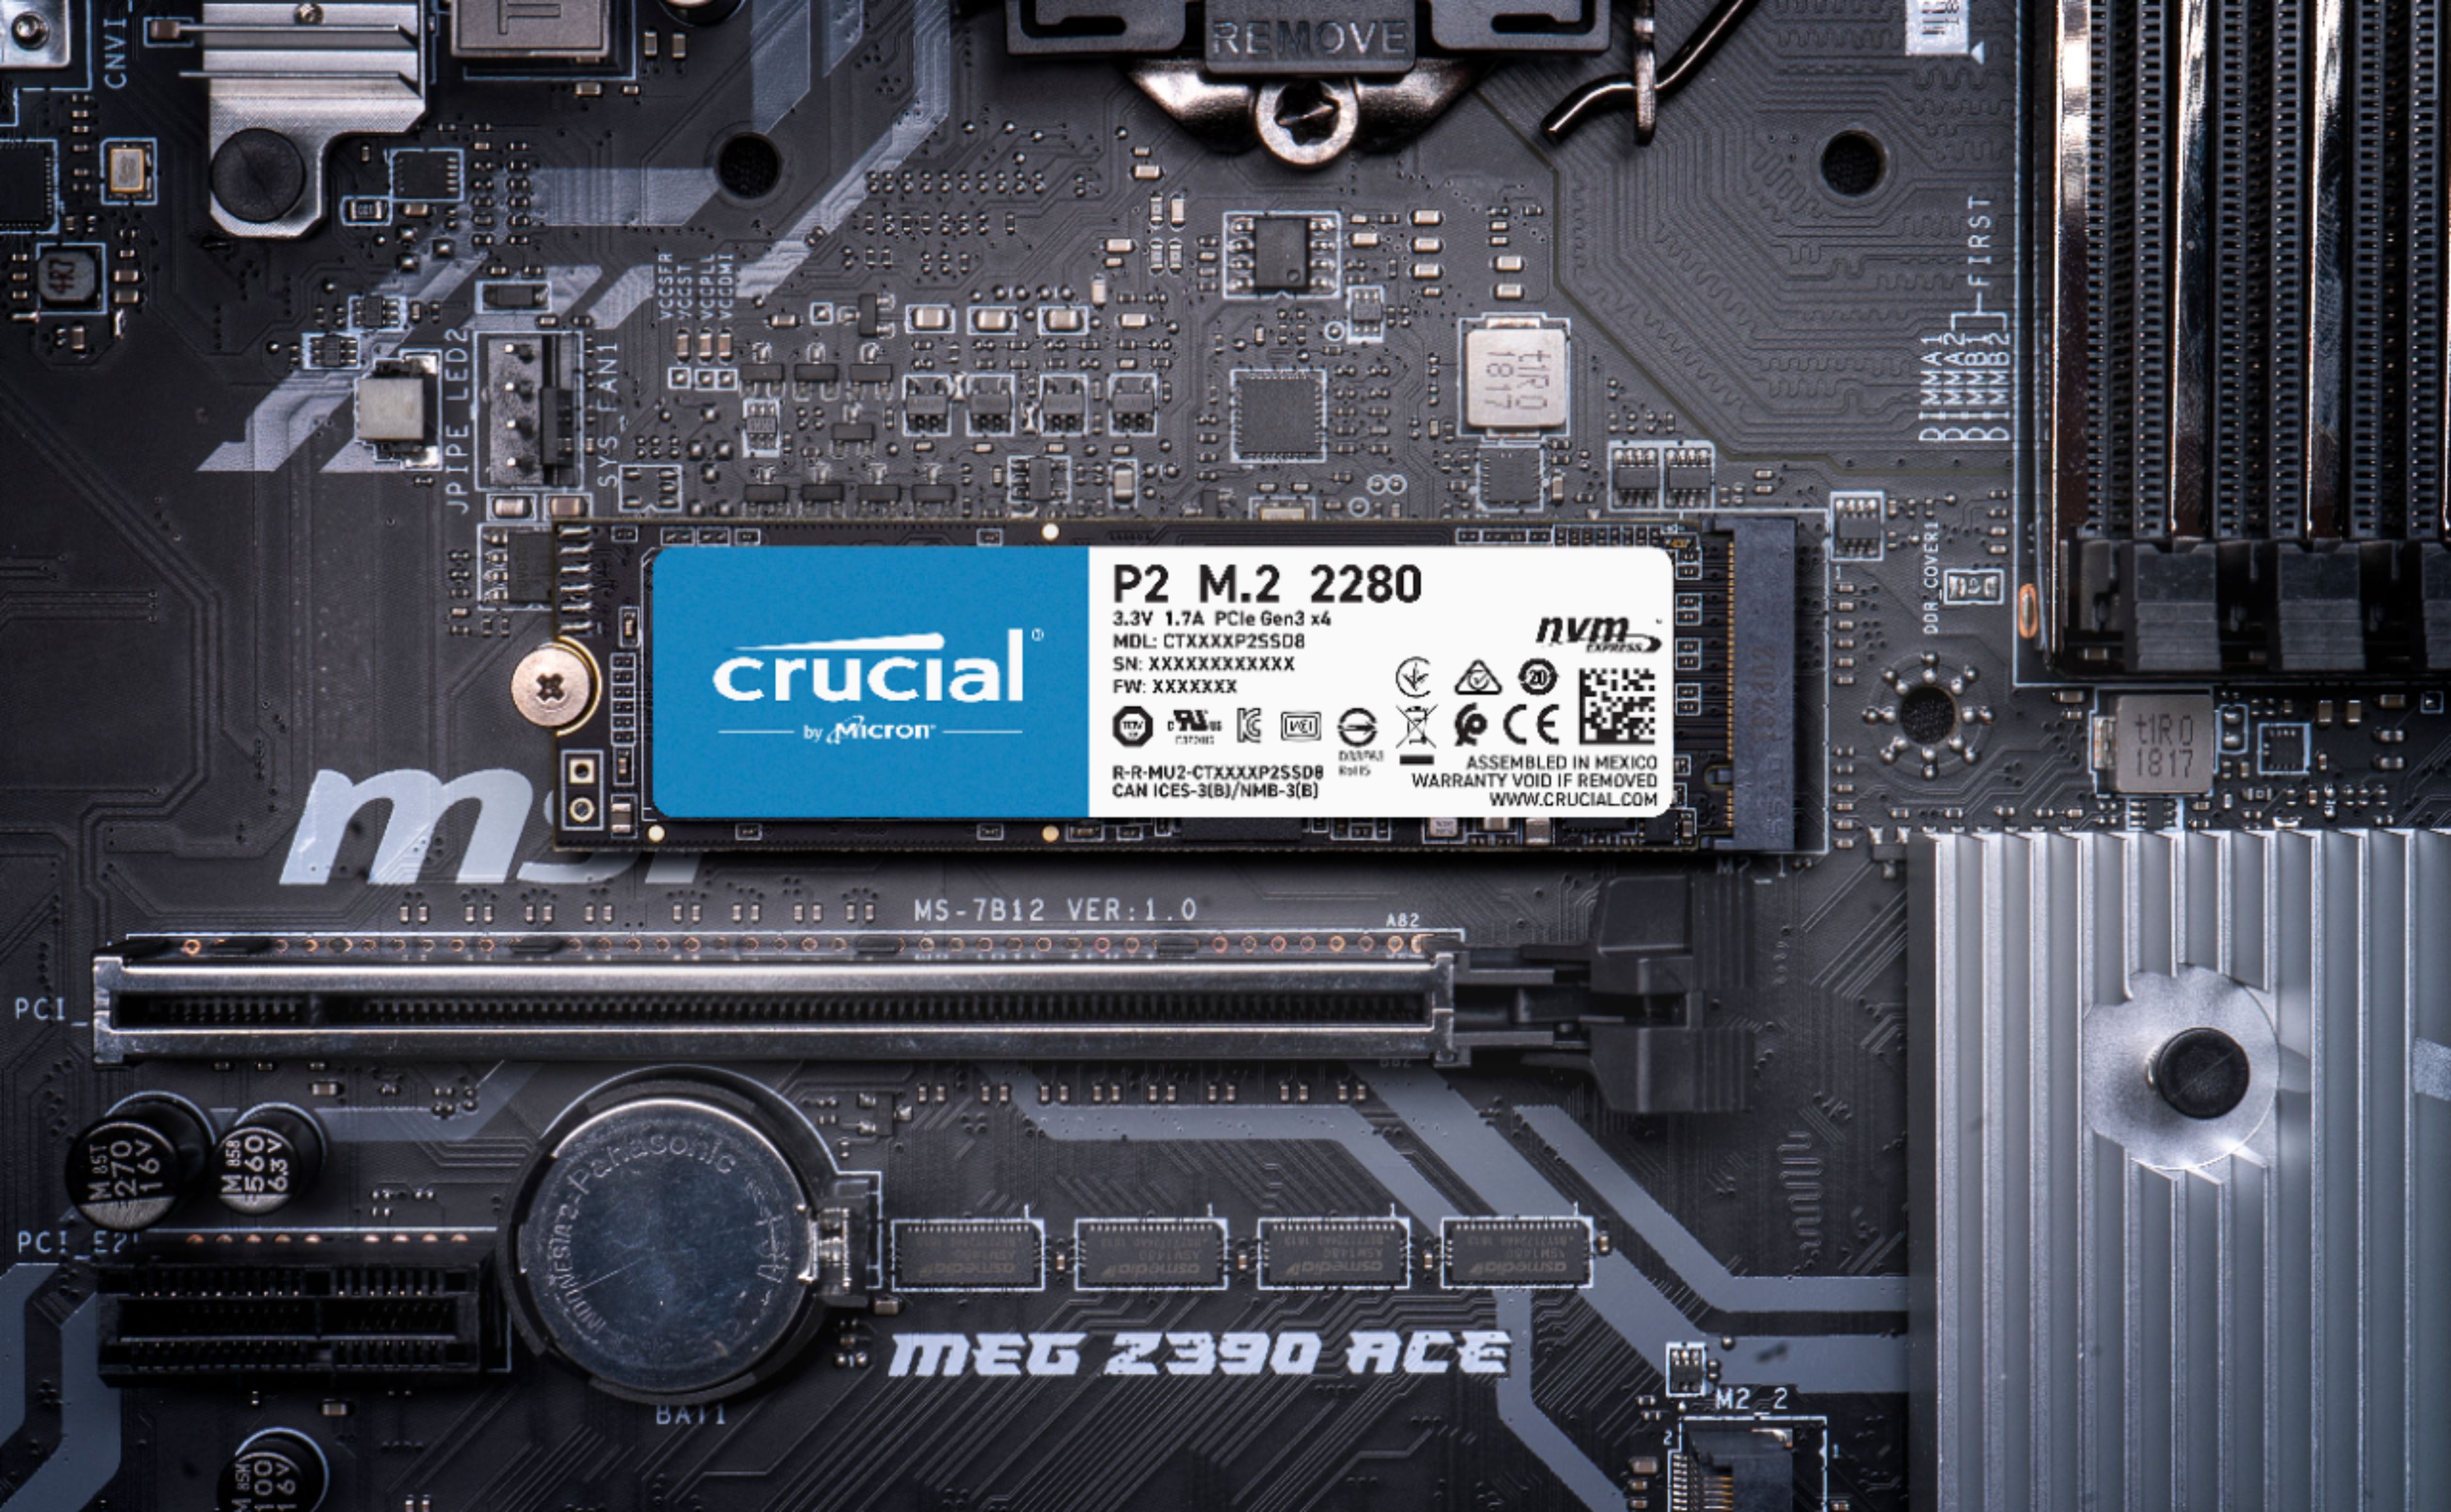  Crucial P1 1TB 3D NAND NVMe PCIe Internal SSD, up to